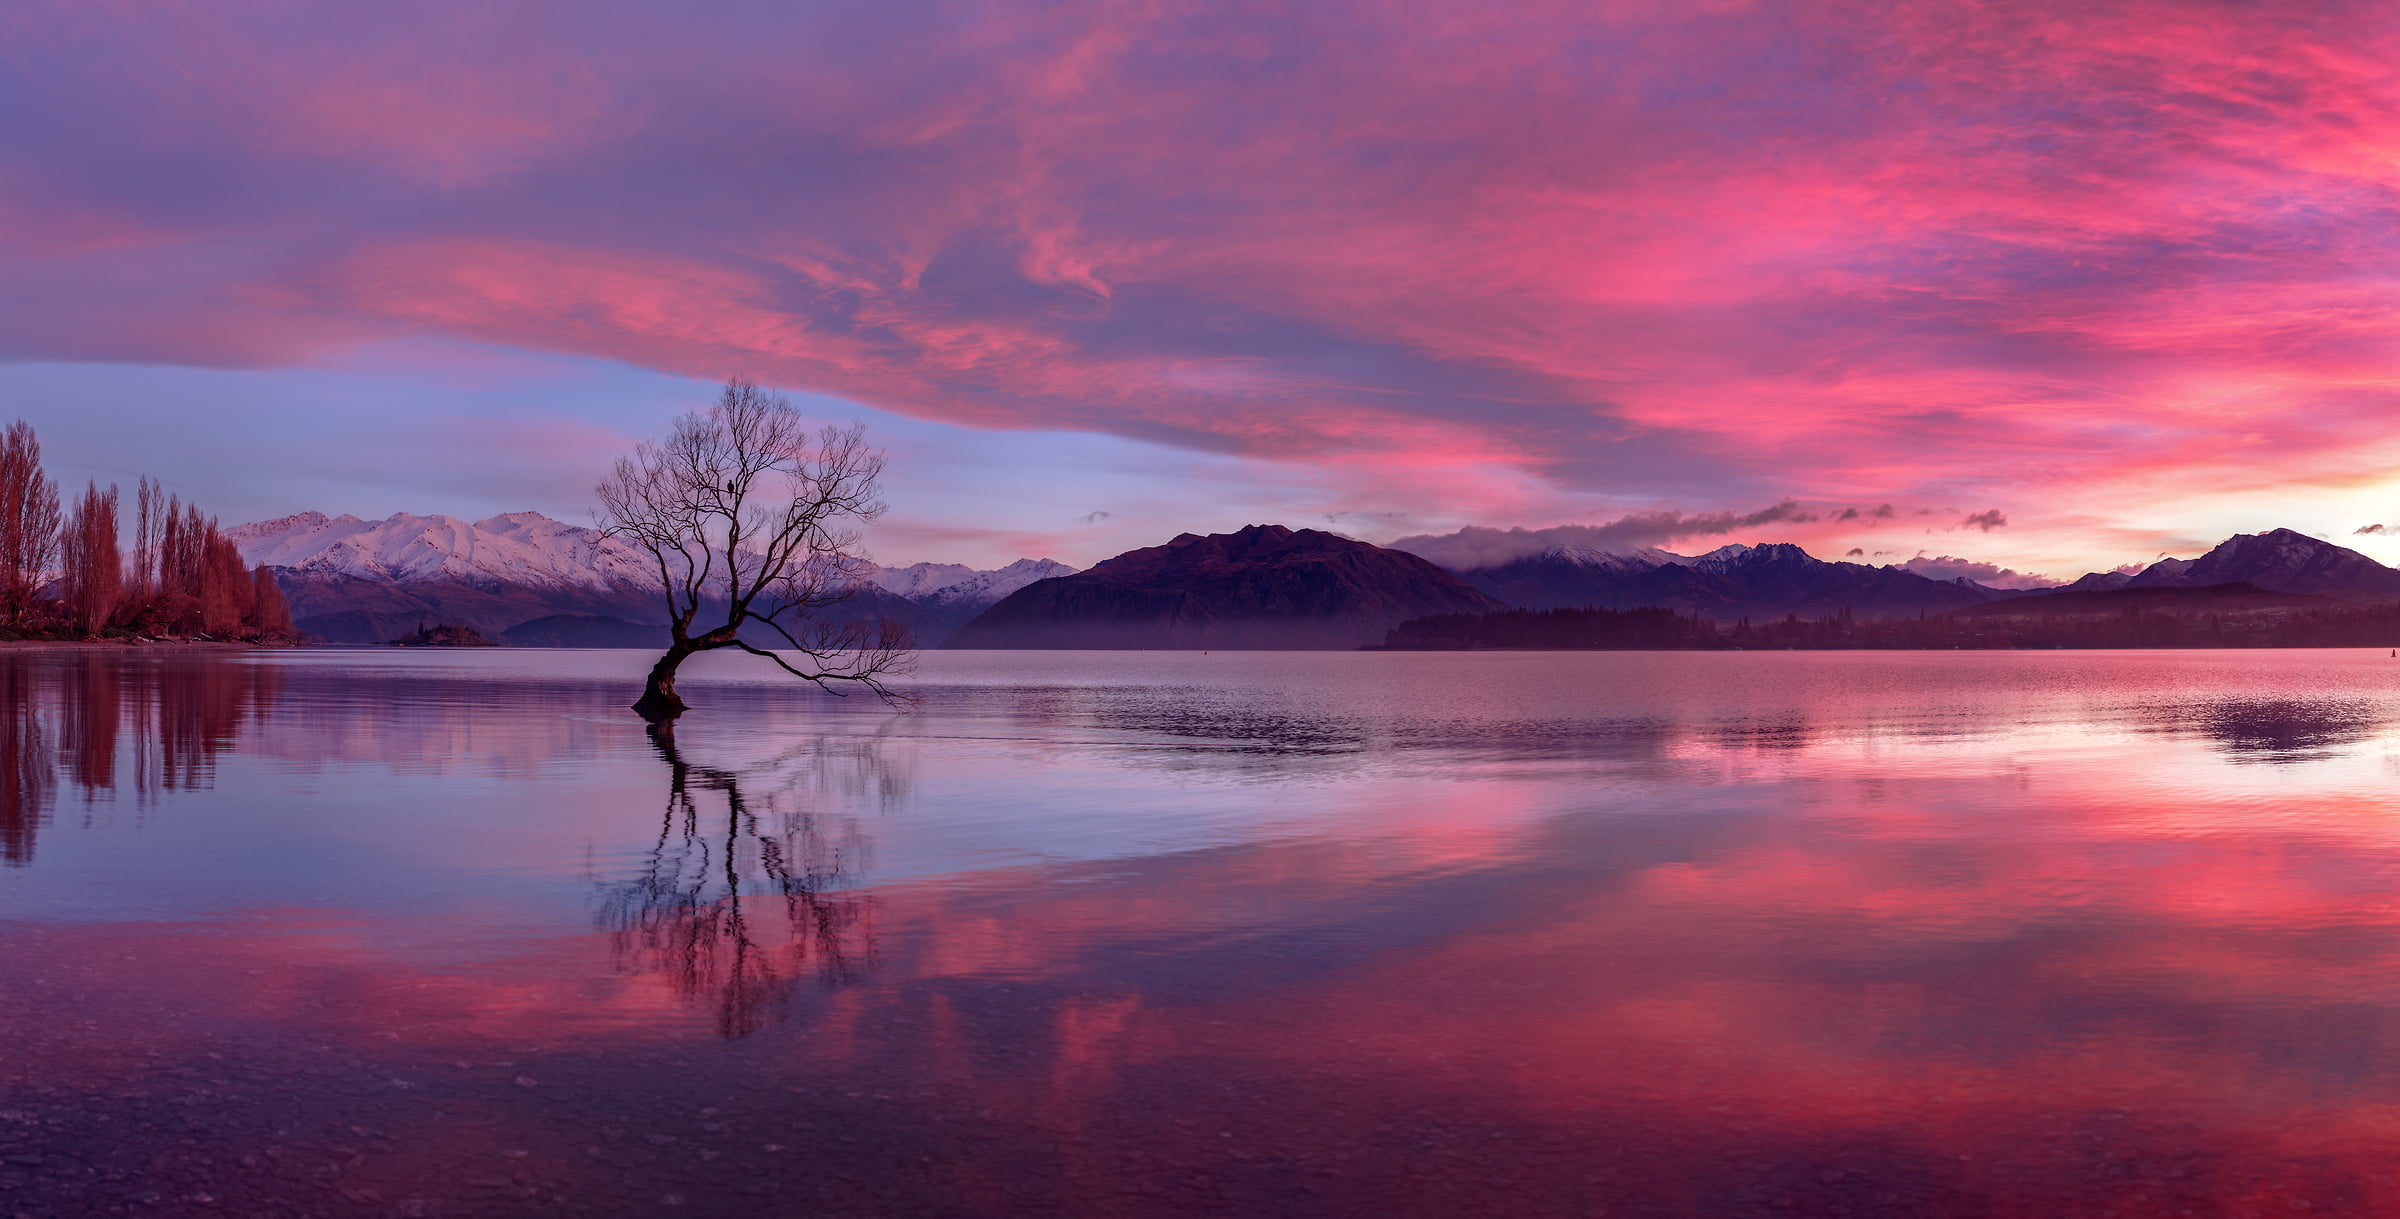 366 megapixels! A very high resolution, large-format VAST photo print of a peaceful water landscape scene; photograph created by Chris Collacott in Wanaka Lake, New Zealand.